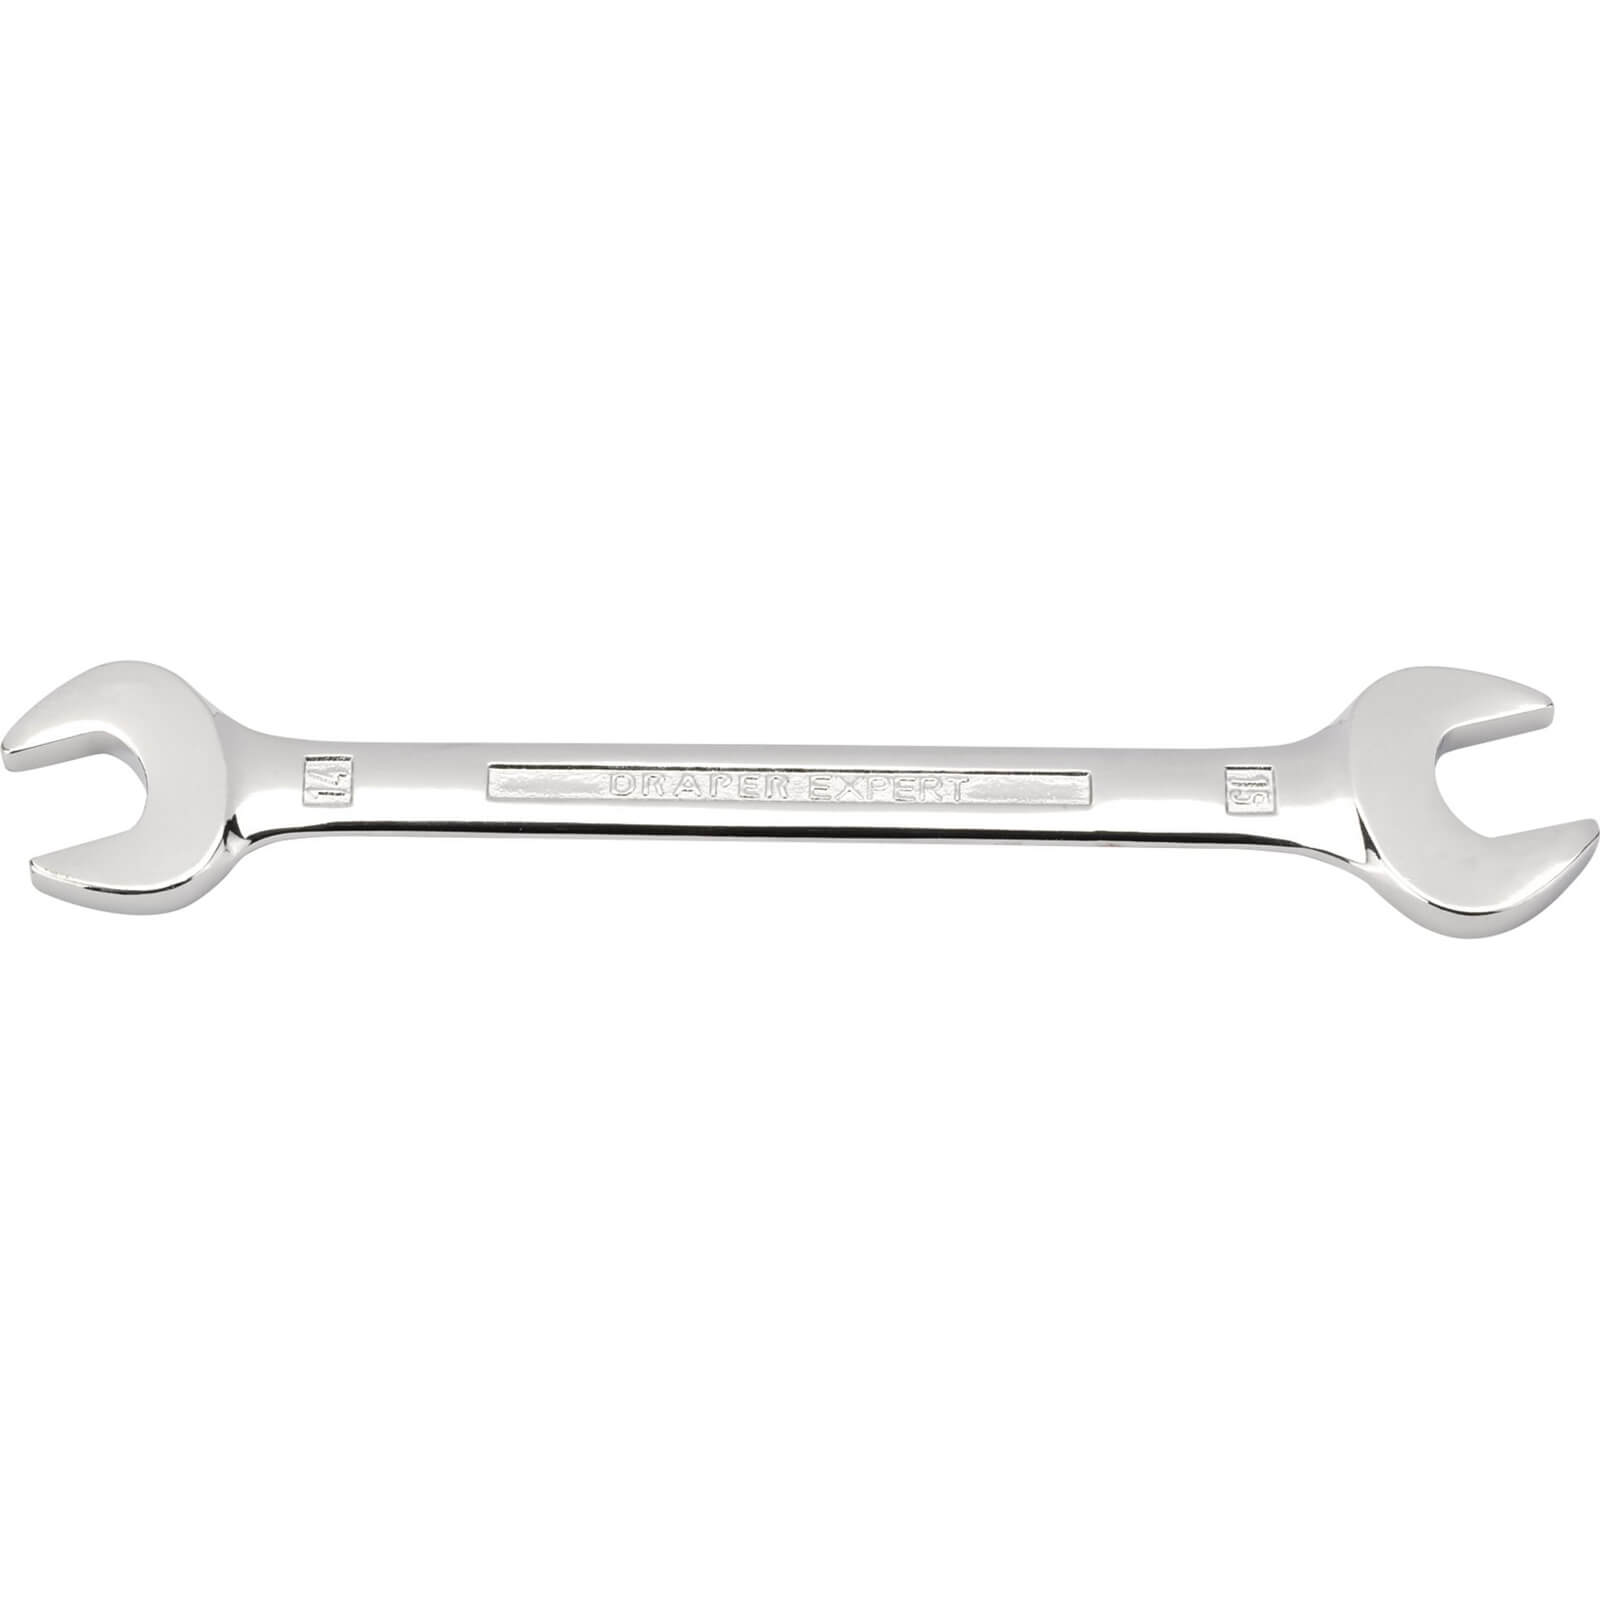 Image of Draper Expert Double Open Ended Spanner Metric 14mm x 15mm